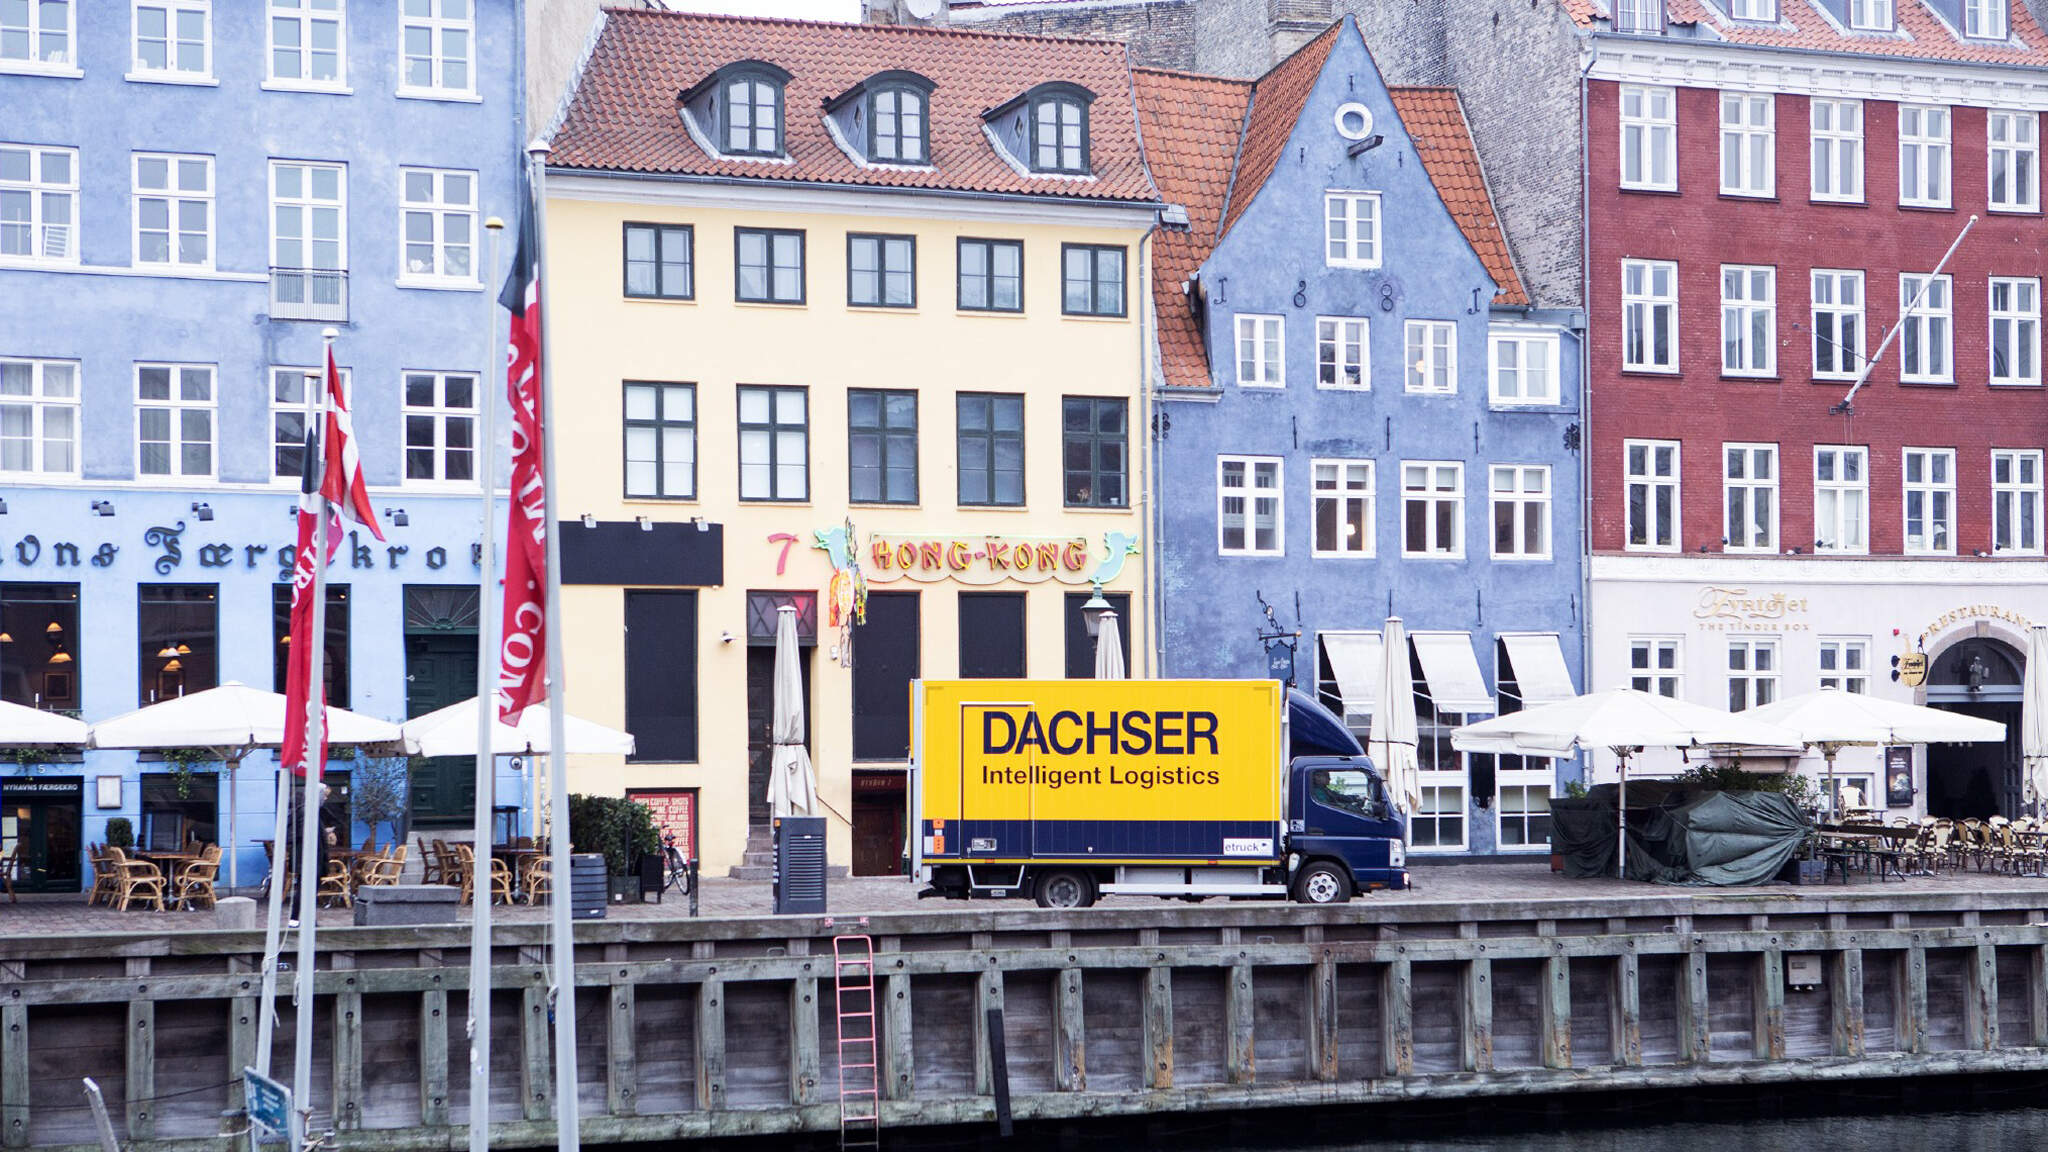 By the end of 2025, the number of cities served by DACHSER Emission-Free Delivery will have doubled to 24.